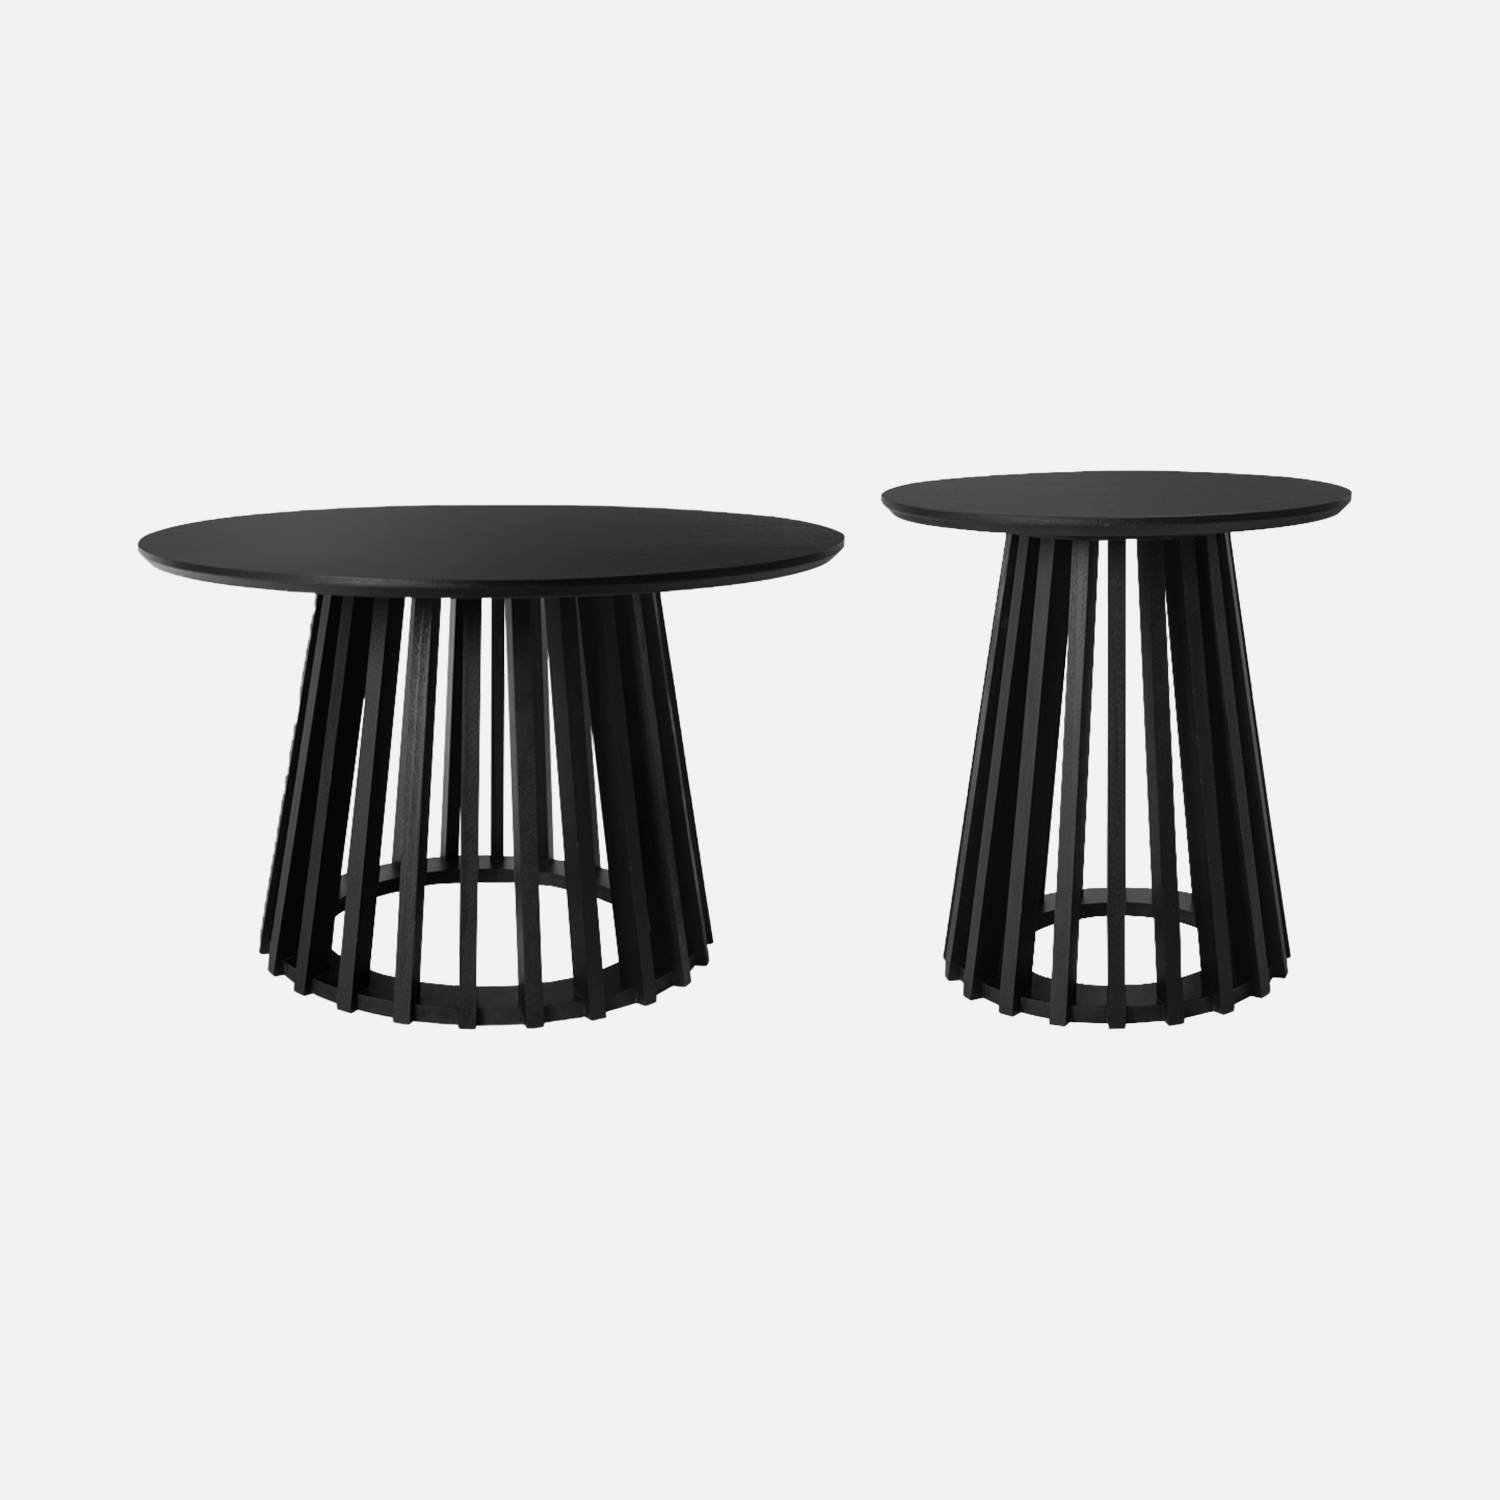 Set of 2 black round coffee tables 40cm and 60cm I sweeek